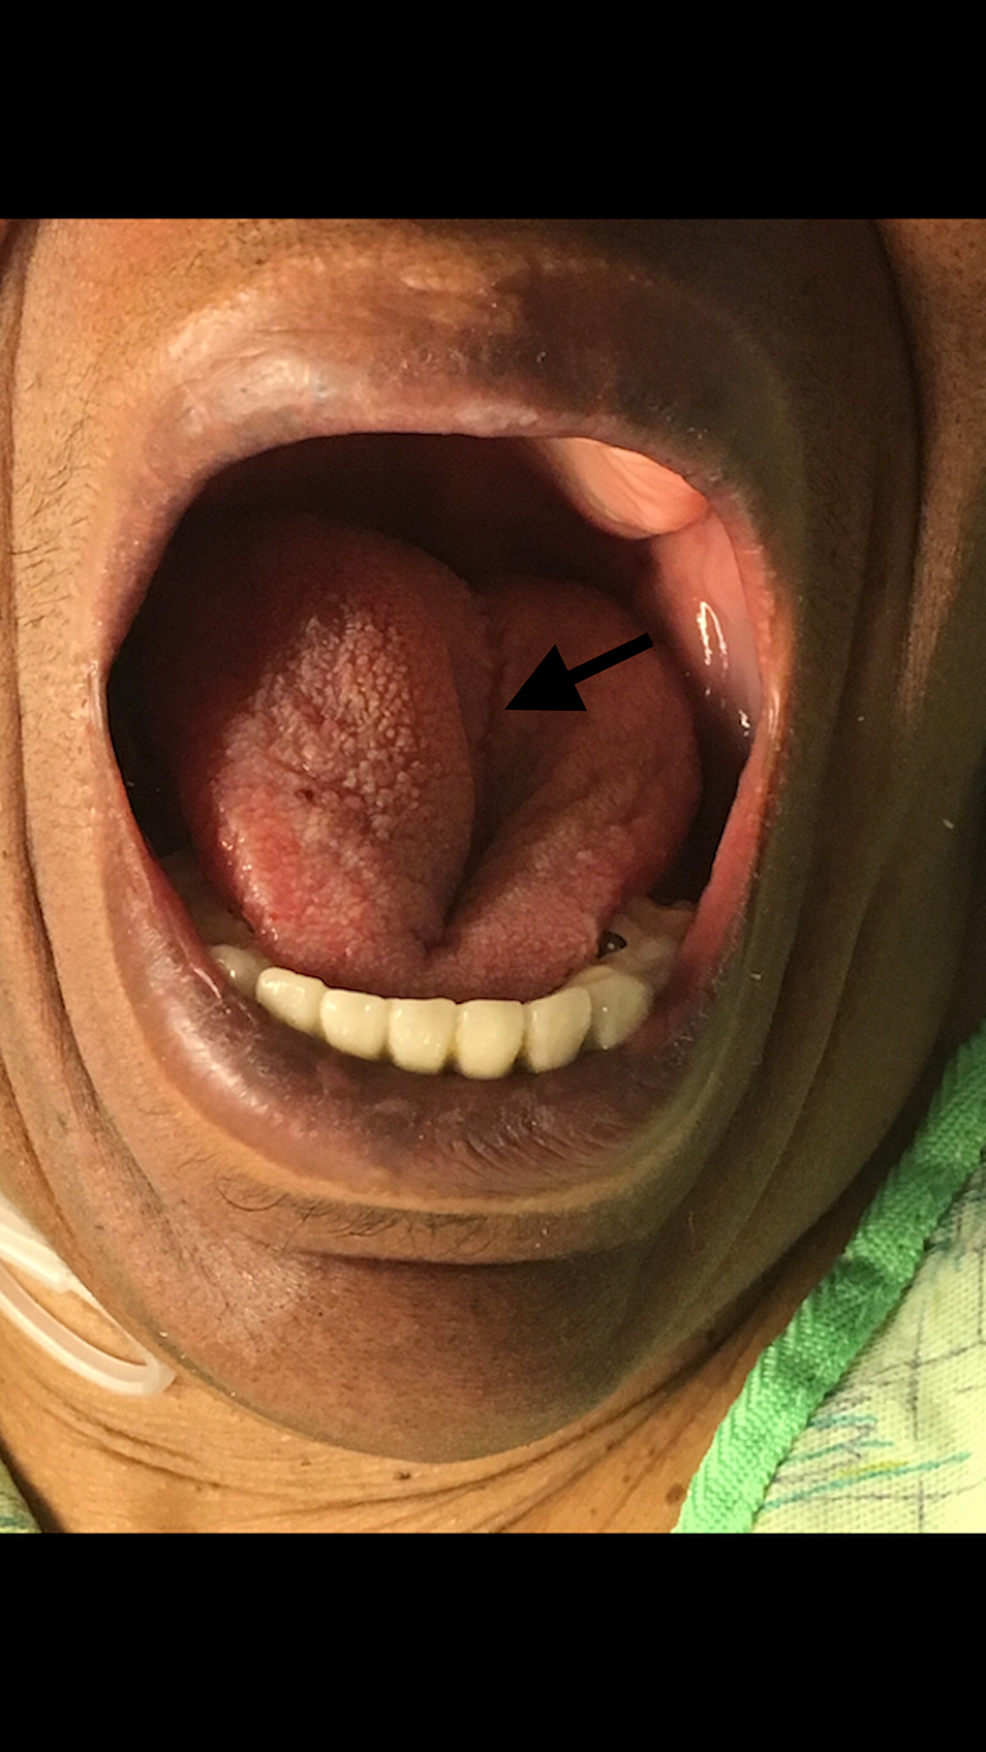 Right-sided-tongue-edema